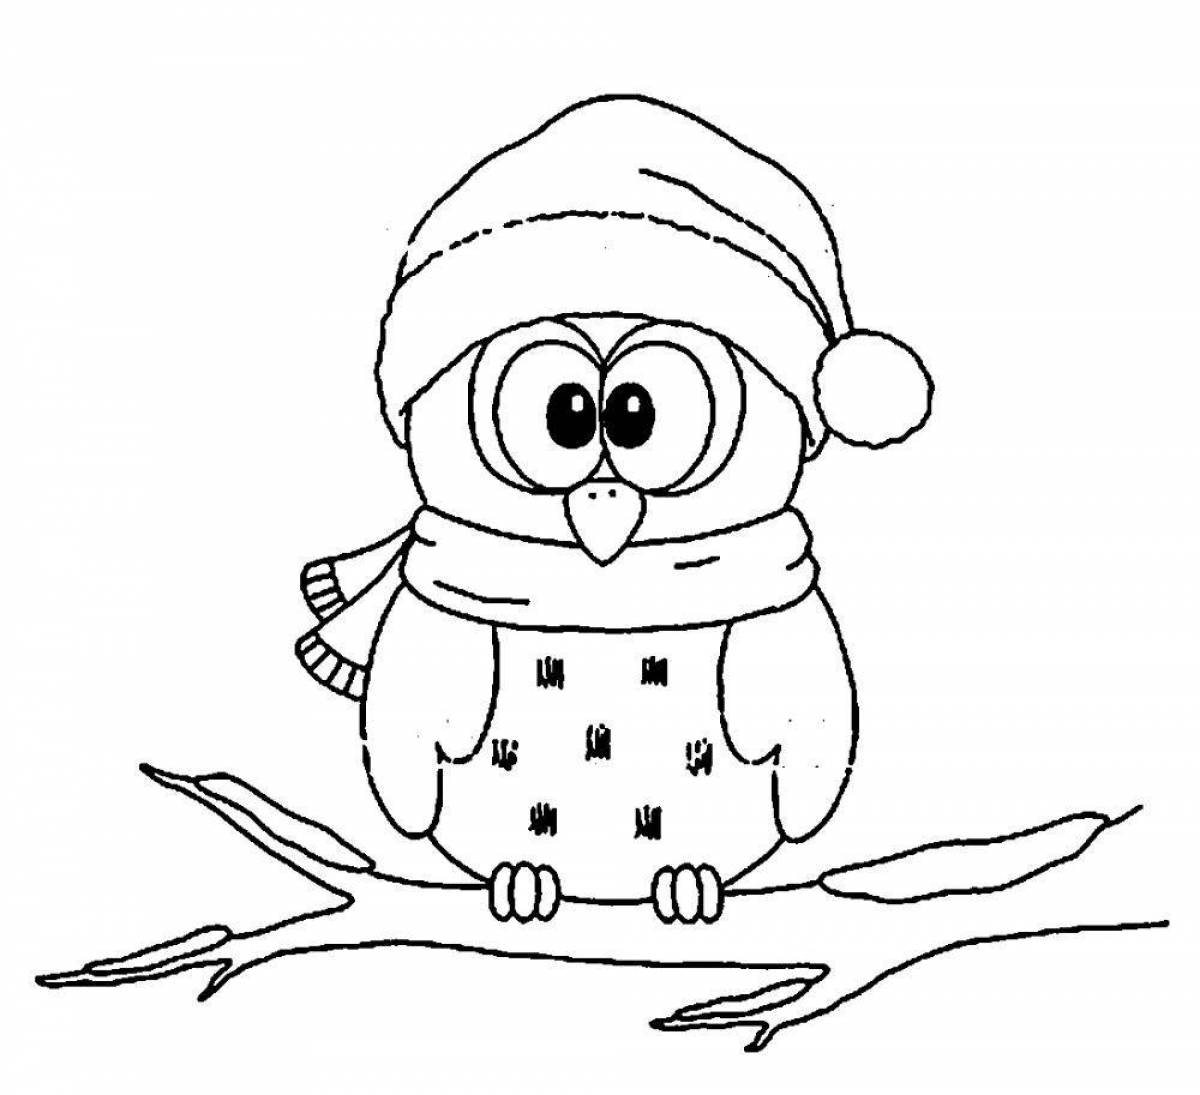 Coloring page festive christmas bird